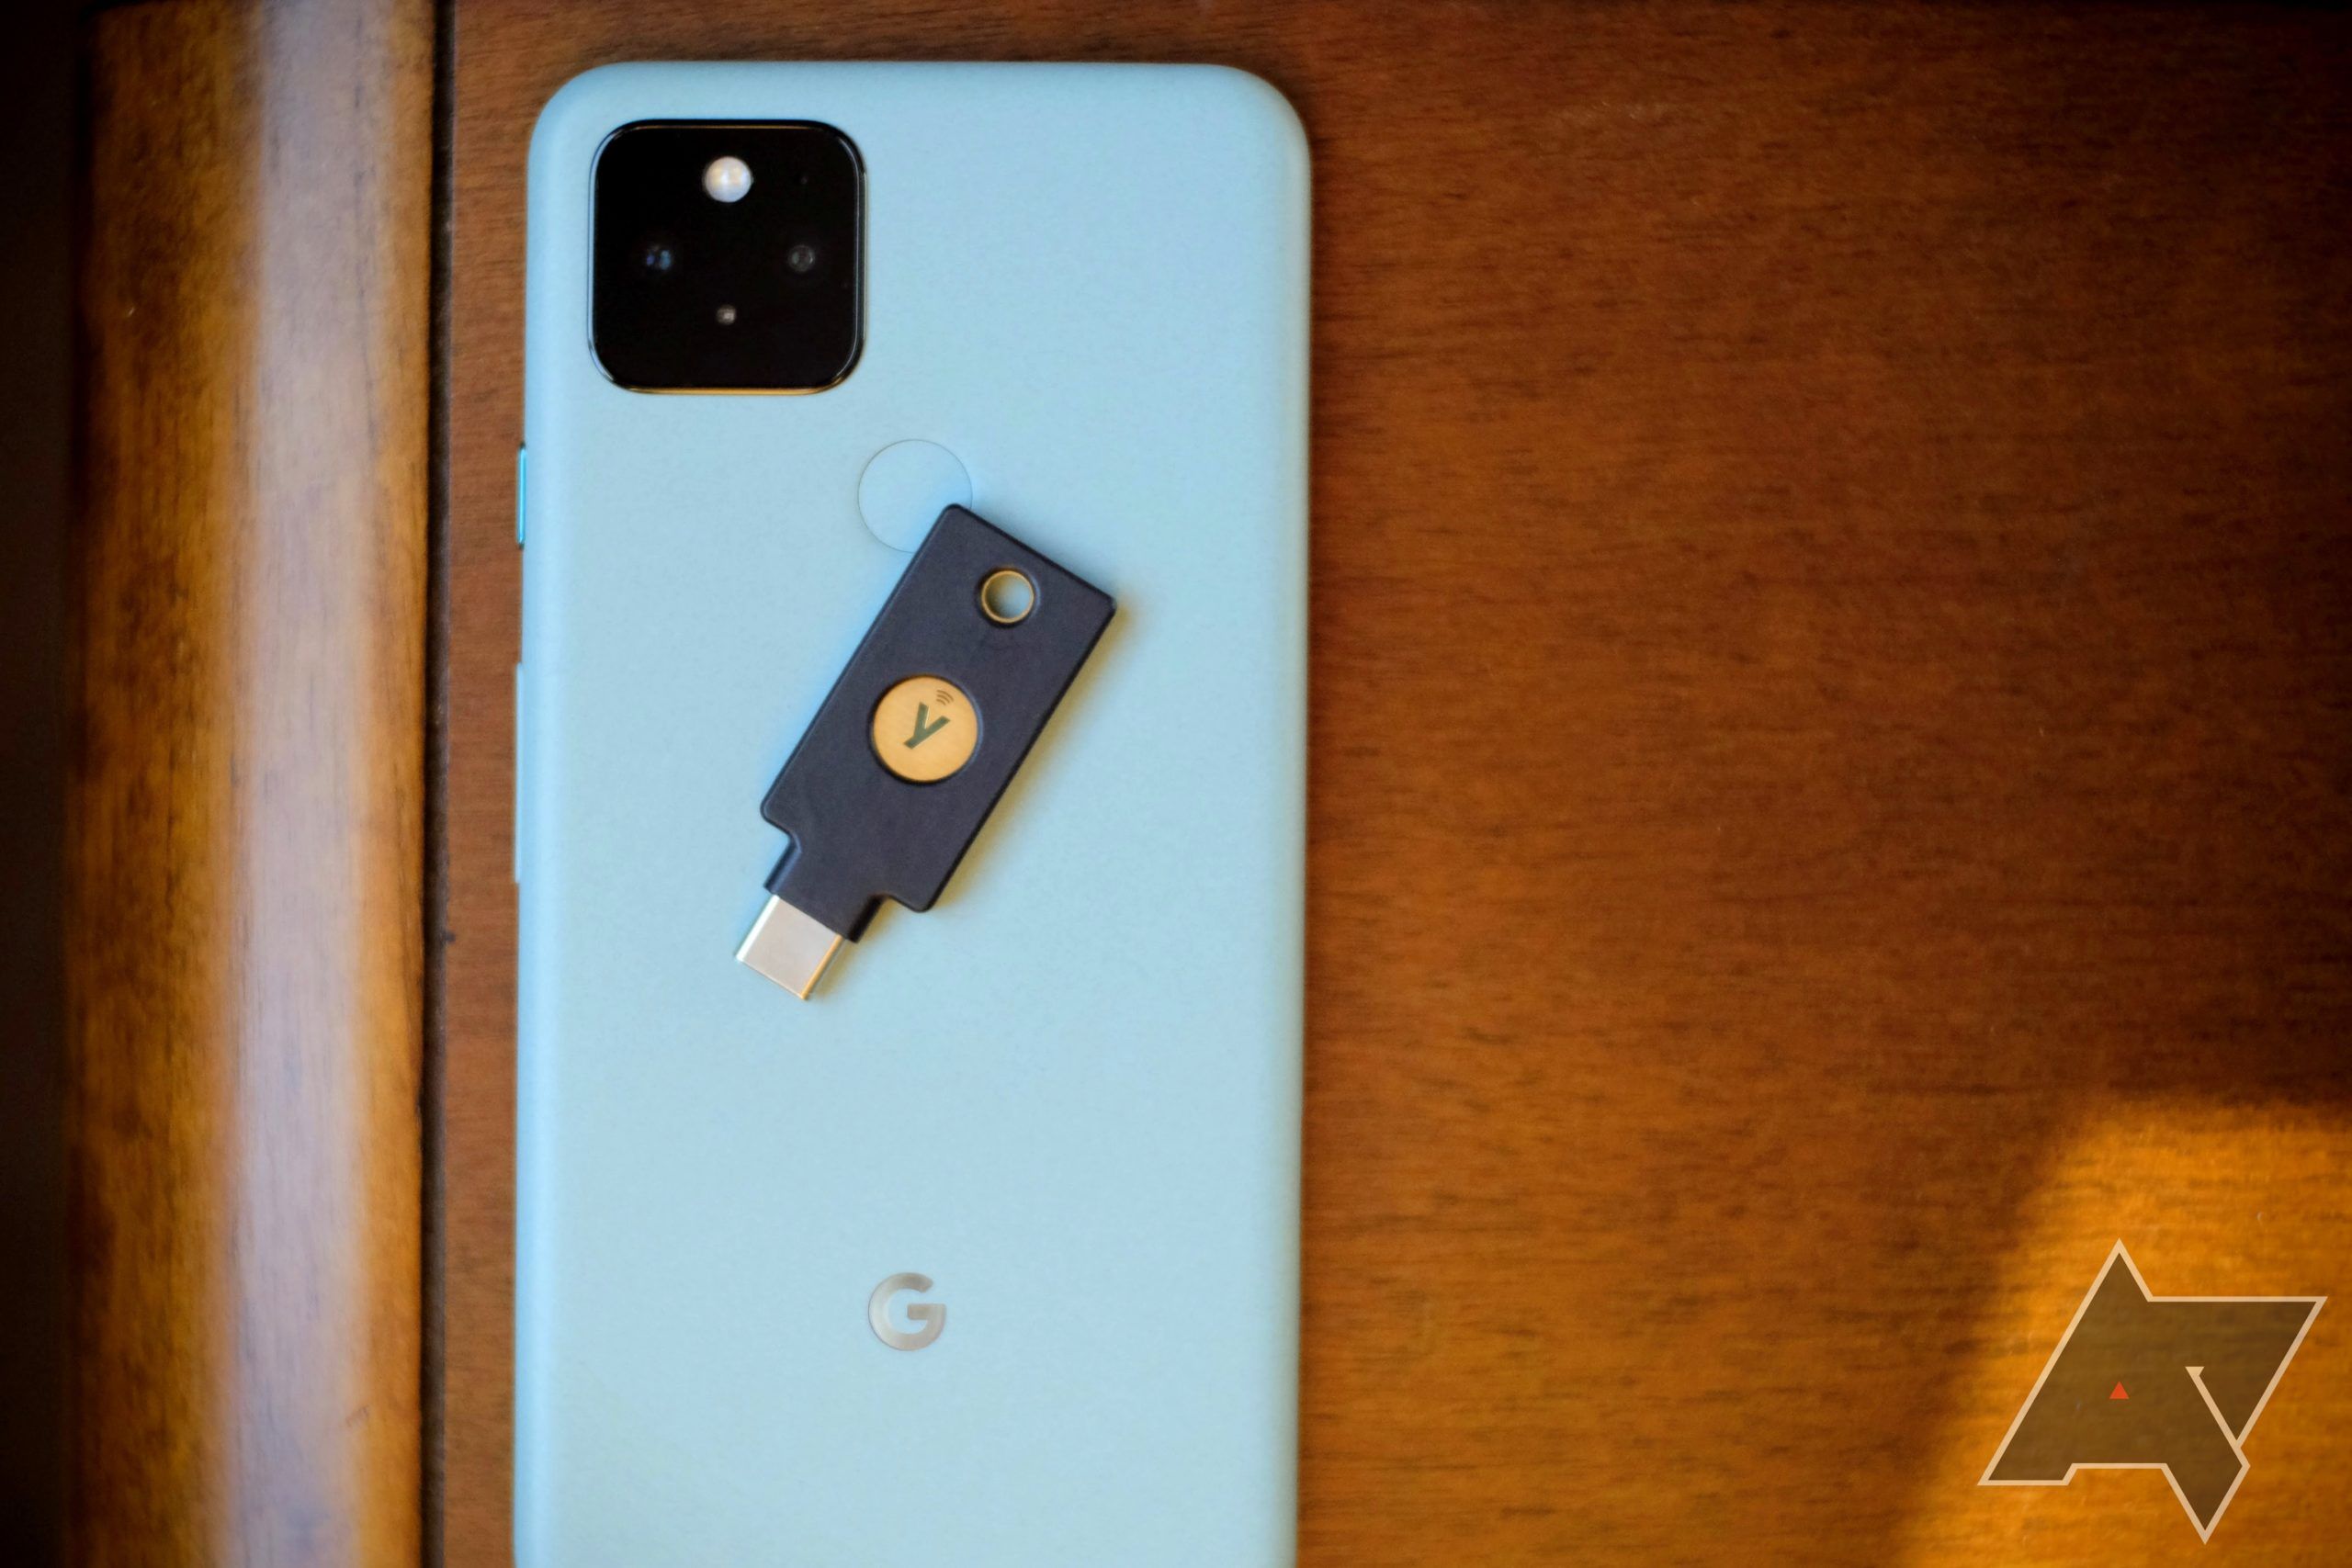 Review of 'YubiKey 5C NFC', a physical security key equipped with USB  Type-C and NFC that can be used on both smartphones and PCs - GIGAZINE